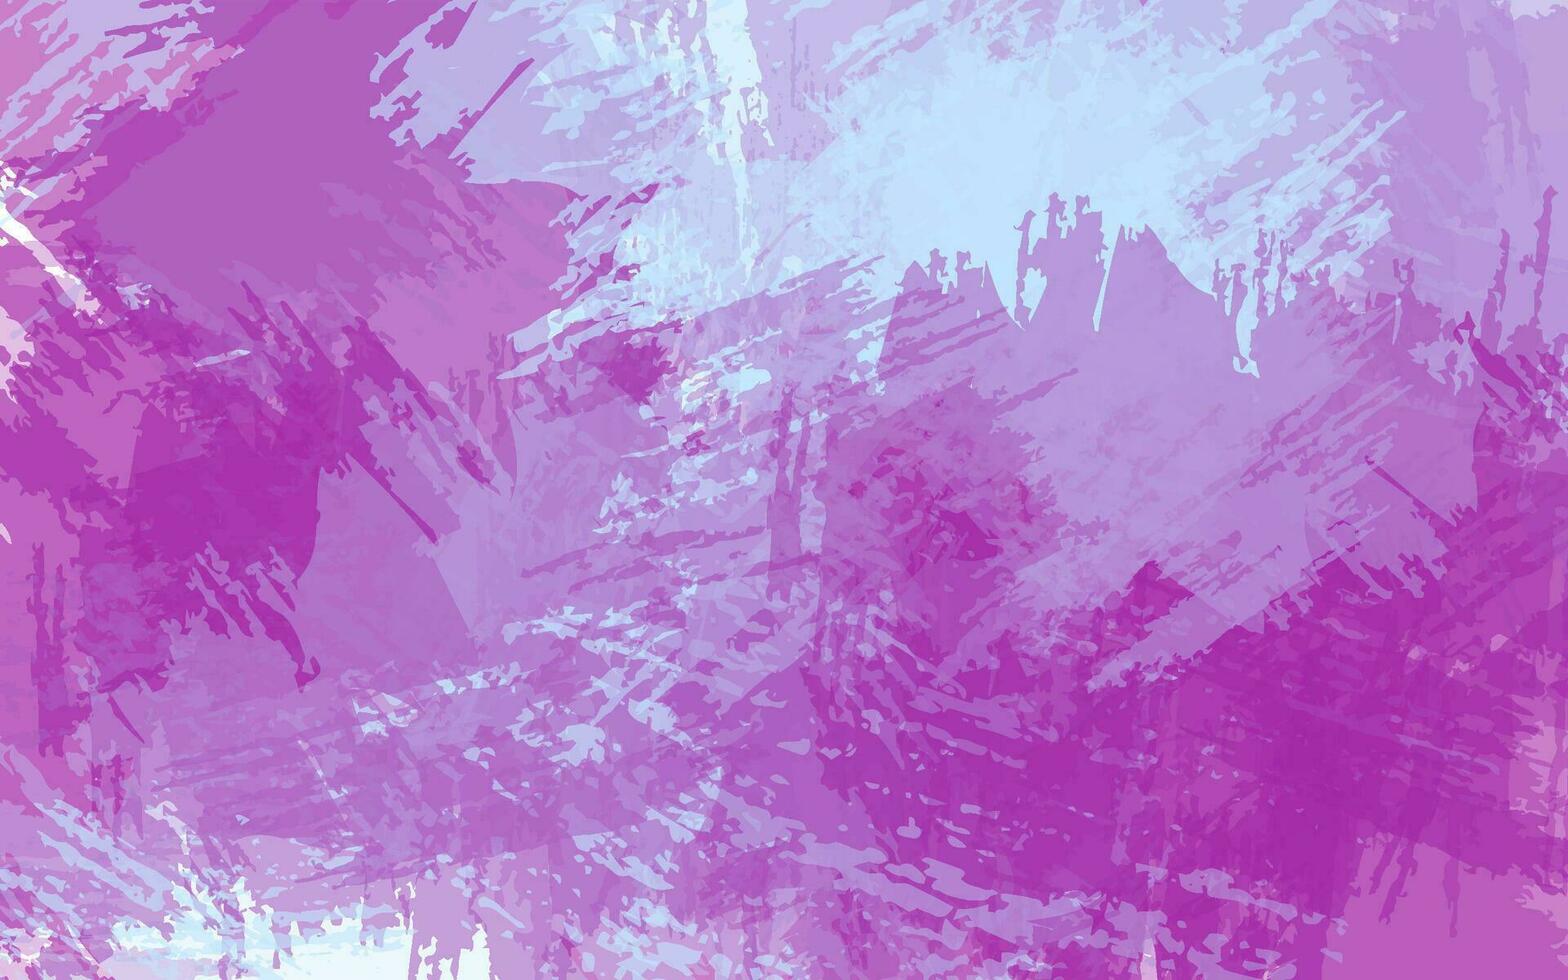 Abstract grunge texture wall texture purple color background vector